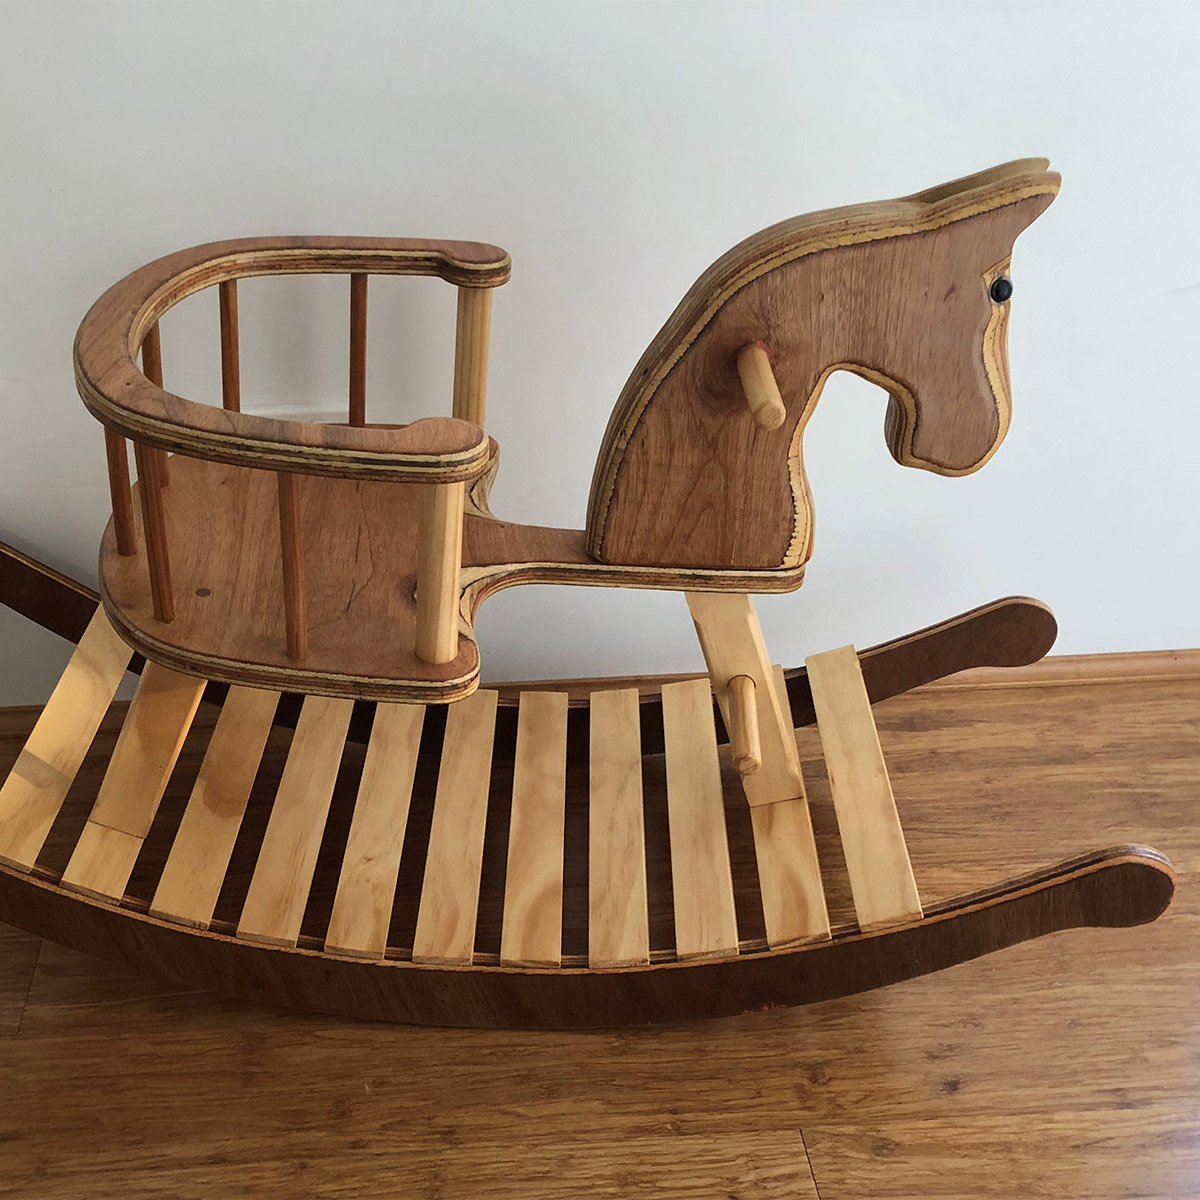 handmade rocking horse with seat